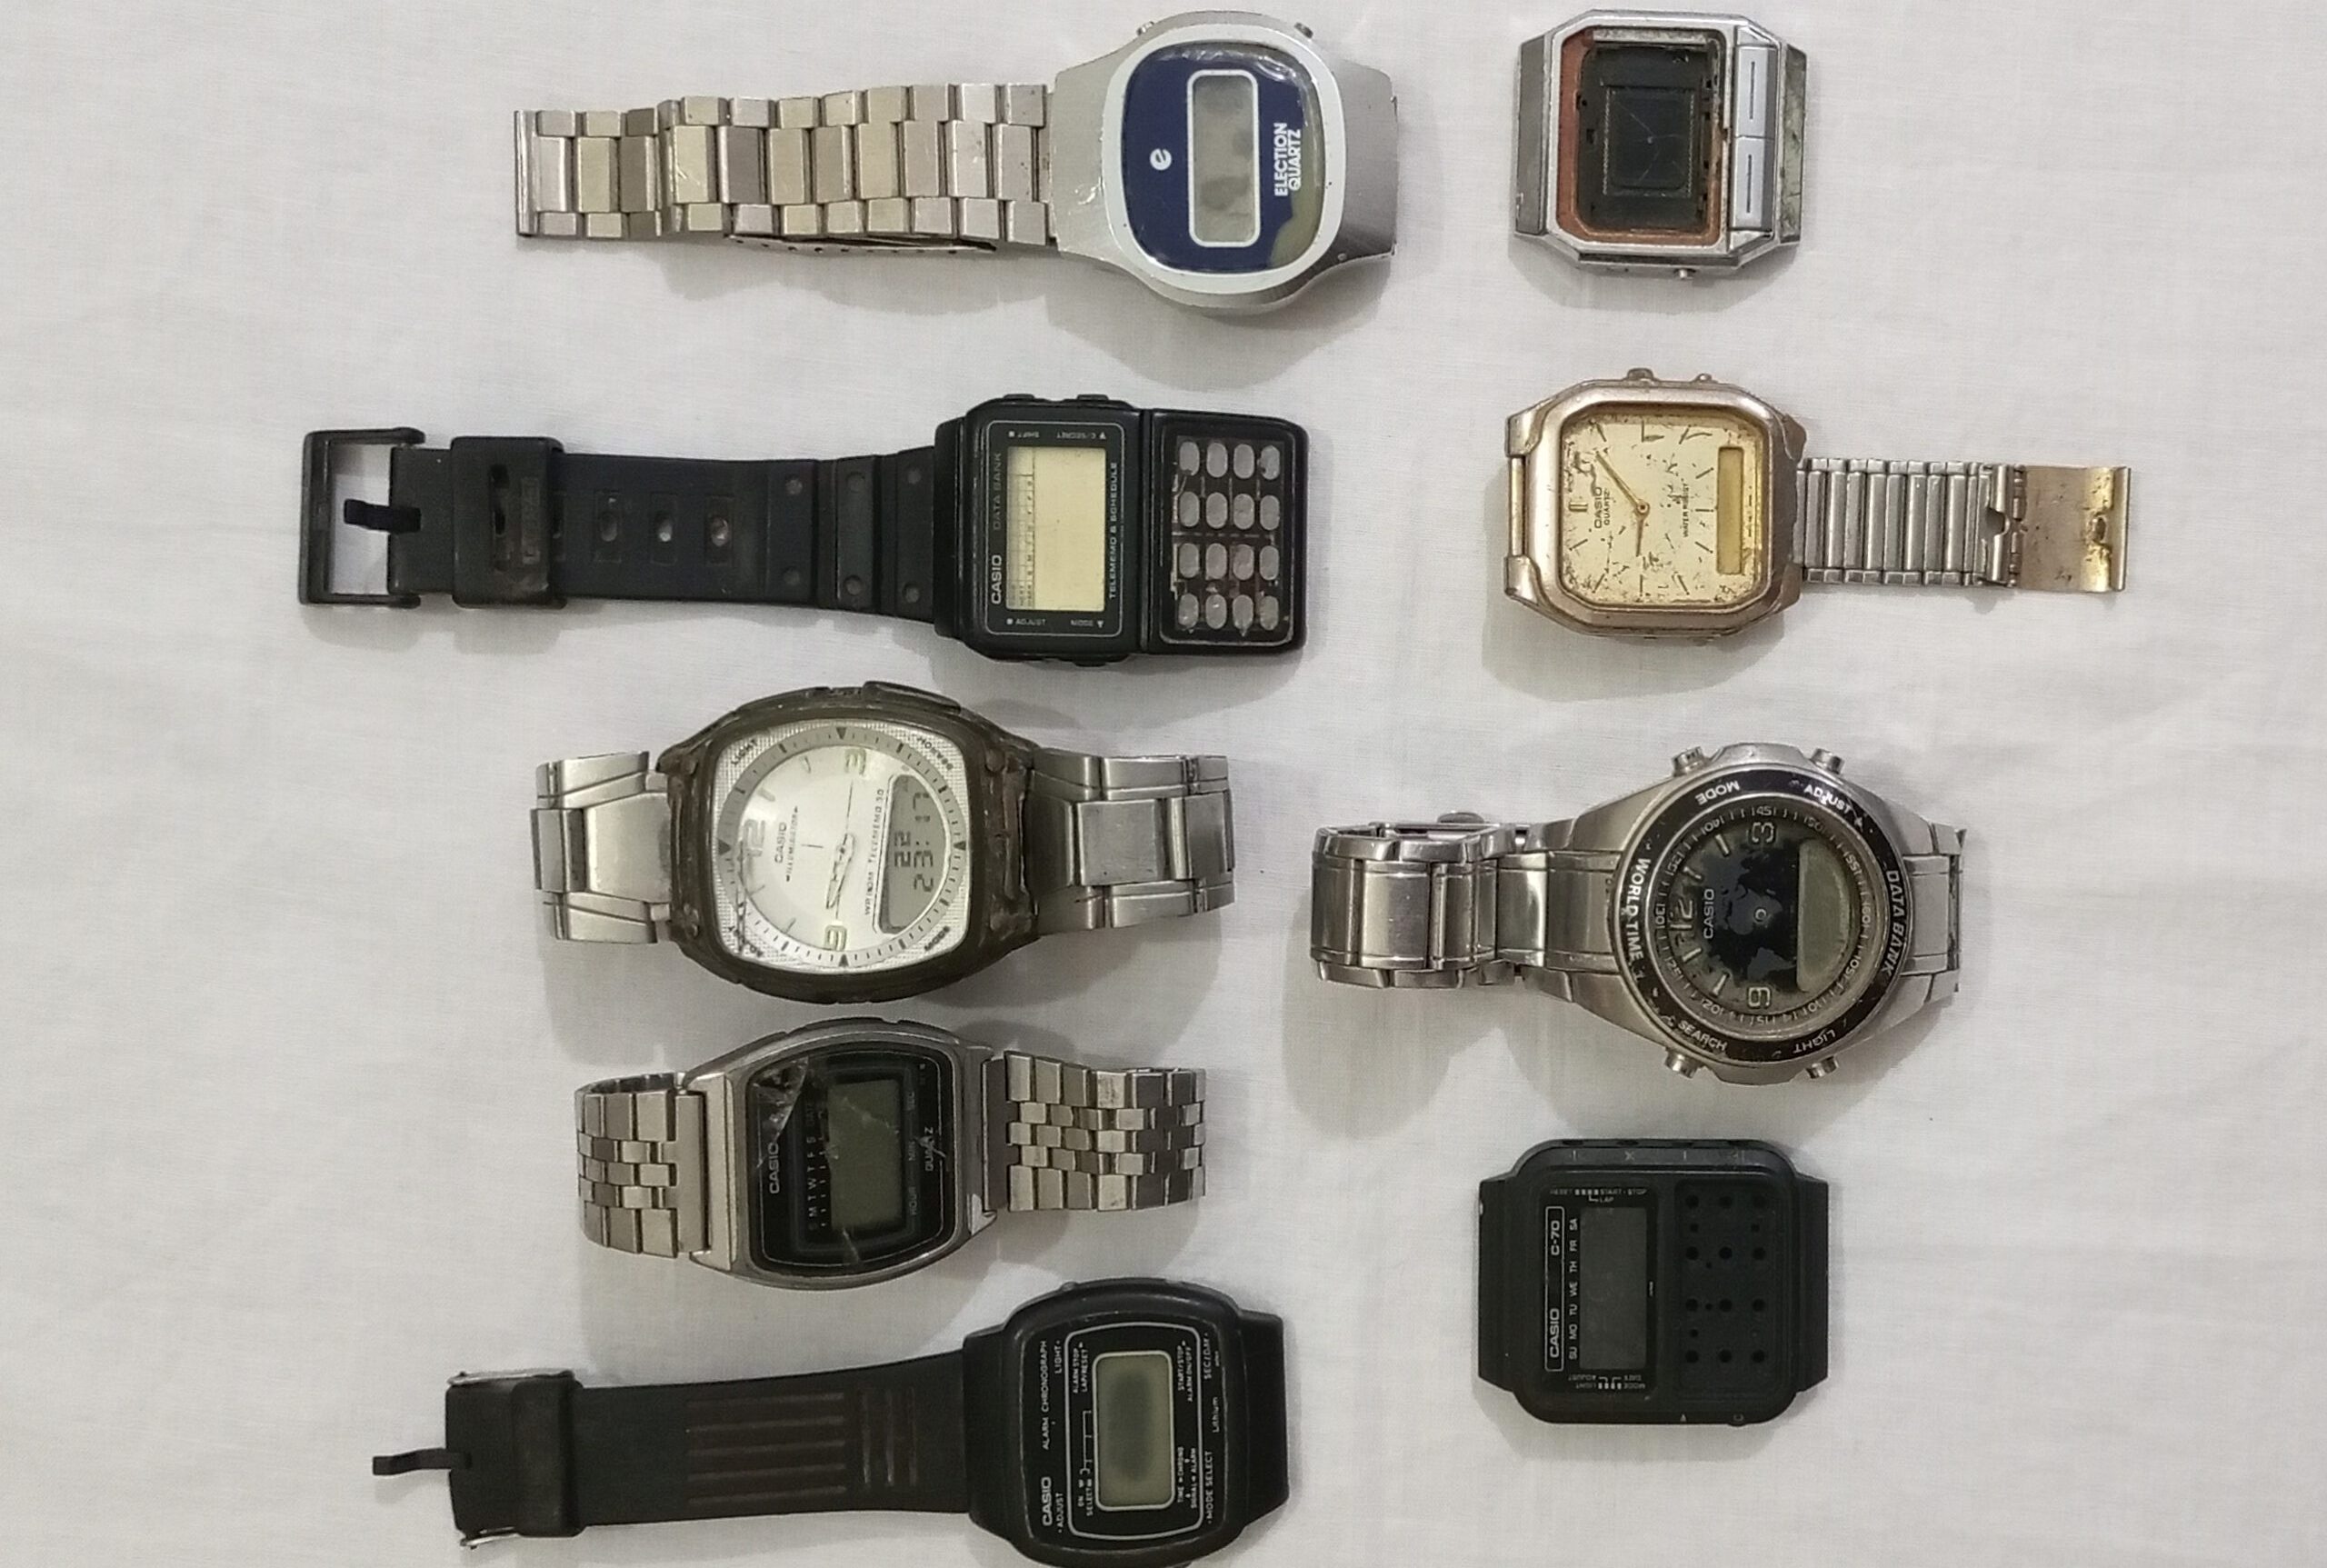 Lot of 18 Vintage Antique Preowned Digital Watches Casio Seiko Citizen Japan - PK00009-IMG_20221020_185123_402-scaled-e1680175773357 - VintageWatches.PK